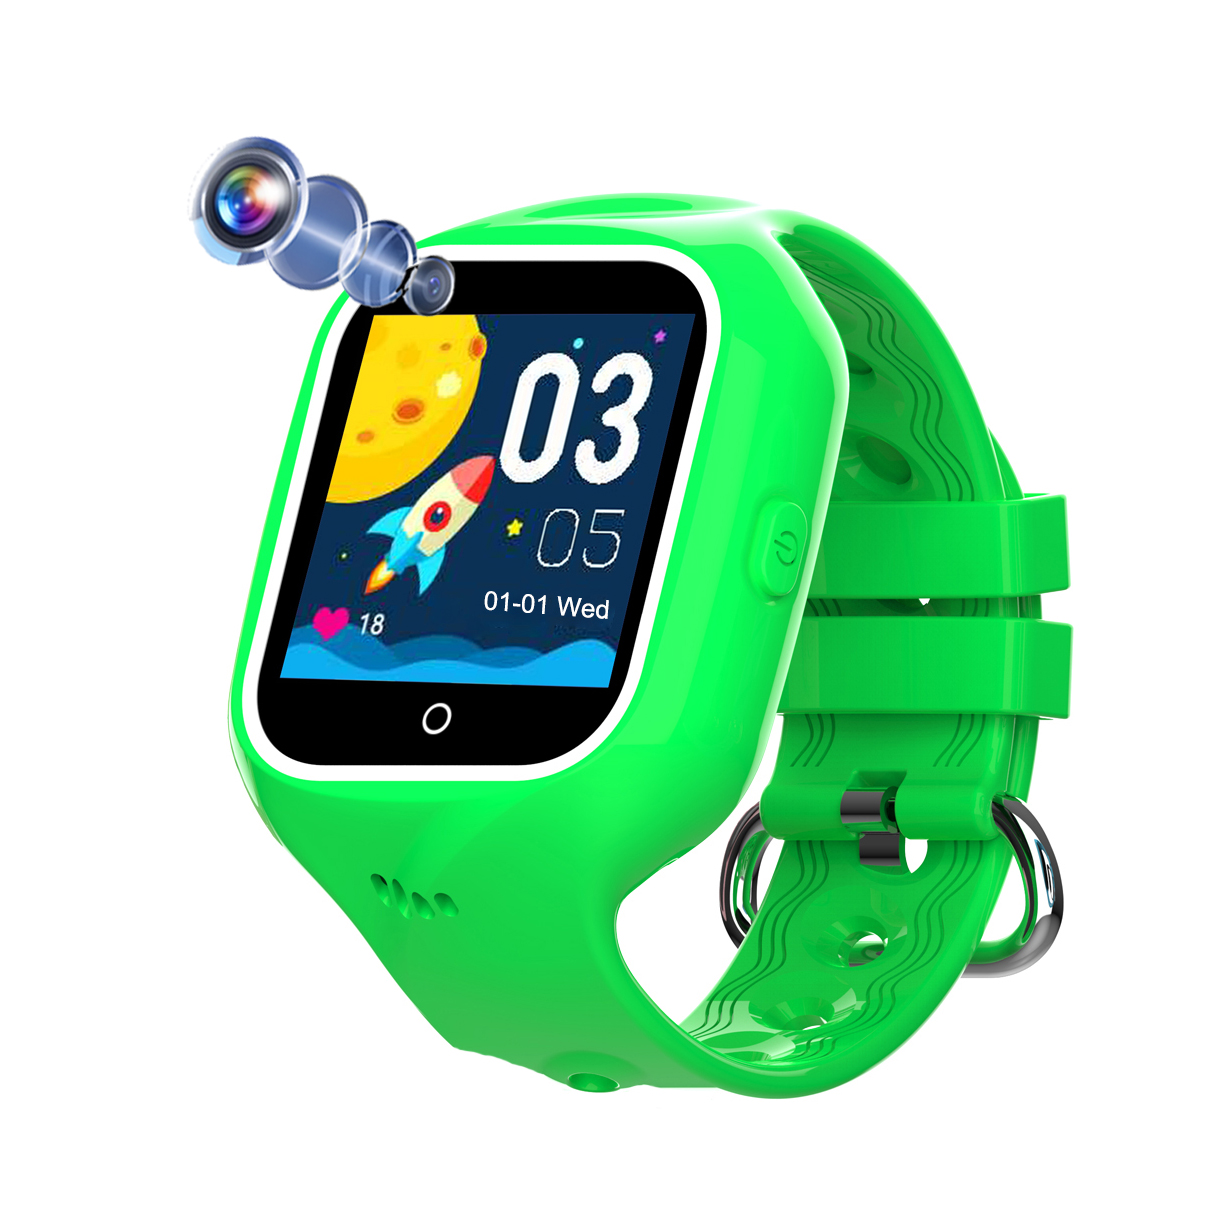 High Quality IP67 Waterproof 4G LTE Parental Control Students Kids GPS Phone Watch with Voice Monitor SOS for Avoid Kidnap D32